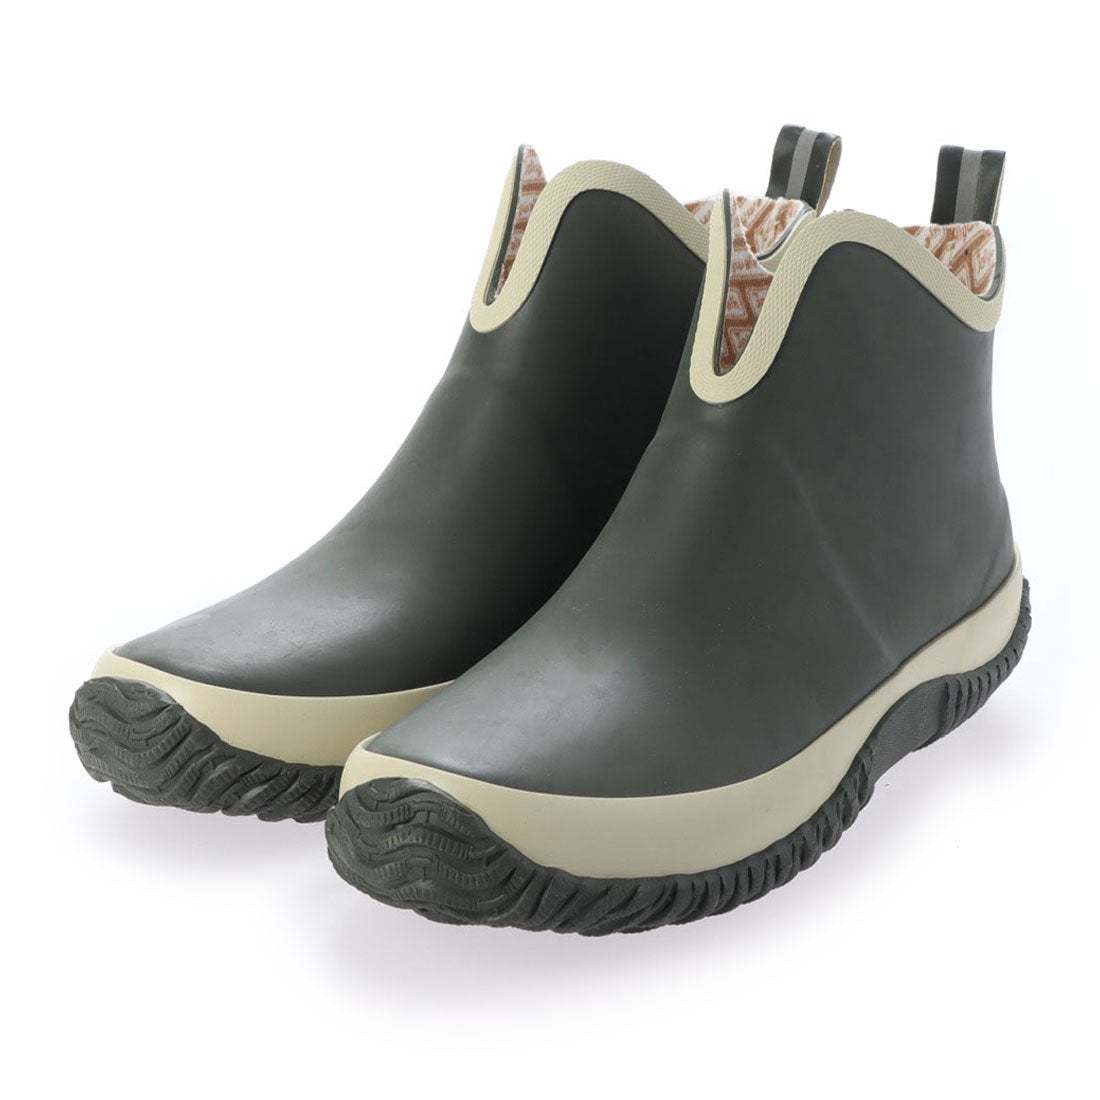  lady's rain boots rain shoes boots rain shoes natural rubber material new goods [20089-kha-235]23.5cm stock one . sale 